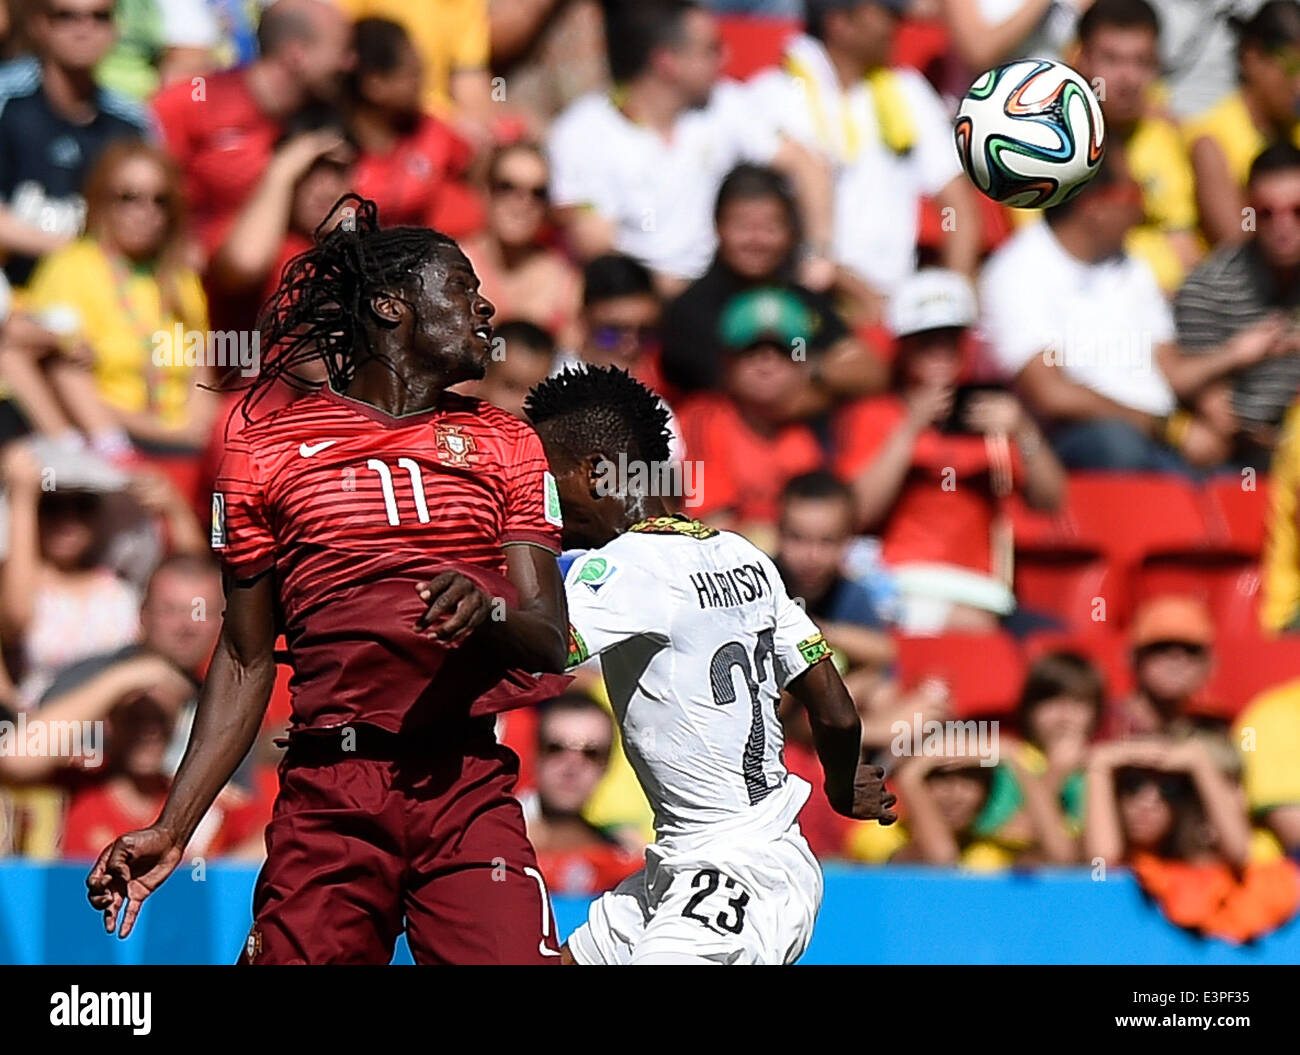 Brasilia, Brazil. 26th June, 2014. Portugal's Eder (L) competes for a header with Ghana's Harrison Afful during a Group G match between Portugal and Ghana of 2014 FIFA World Cup at the Estadio Nacional Stadium in Brasilia, Brazil, June 26, 2014. Portugal won 2-1 over Ghana on Thursday. © Qi Heng/Xinhua/Alamy Live News Stock Photo